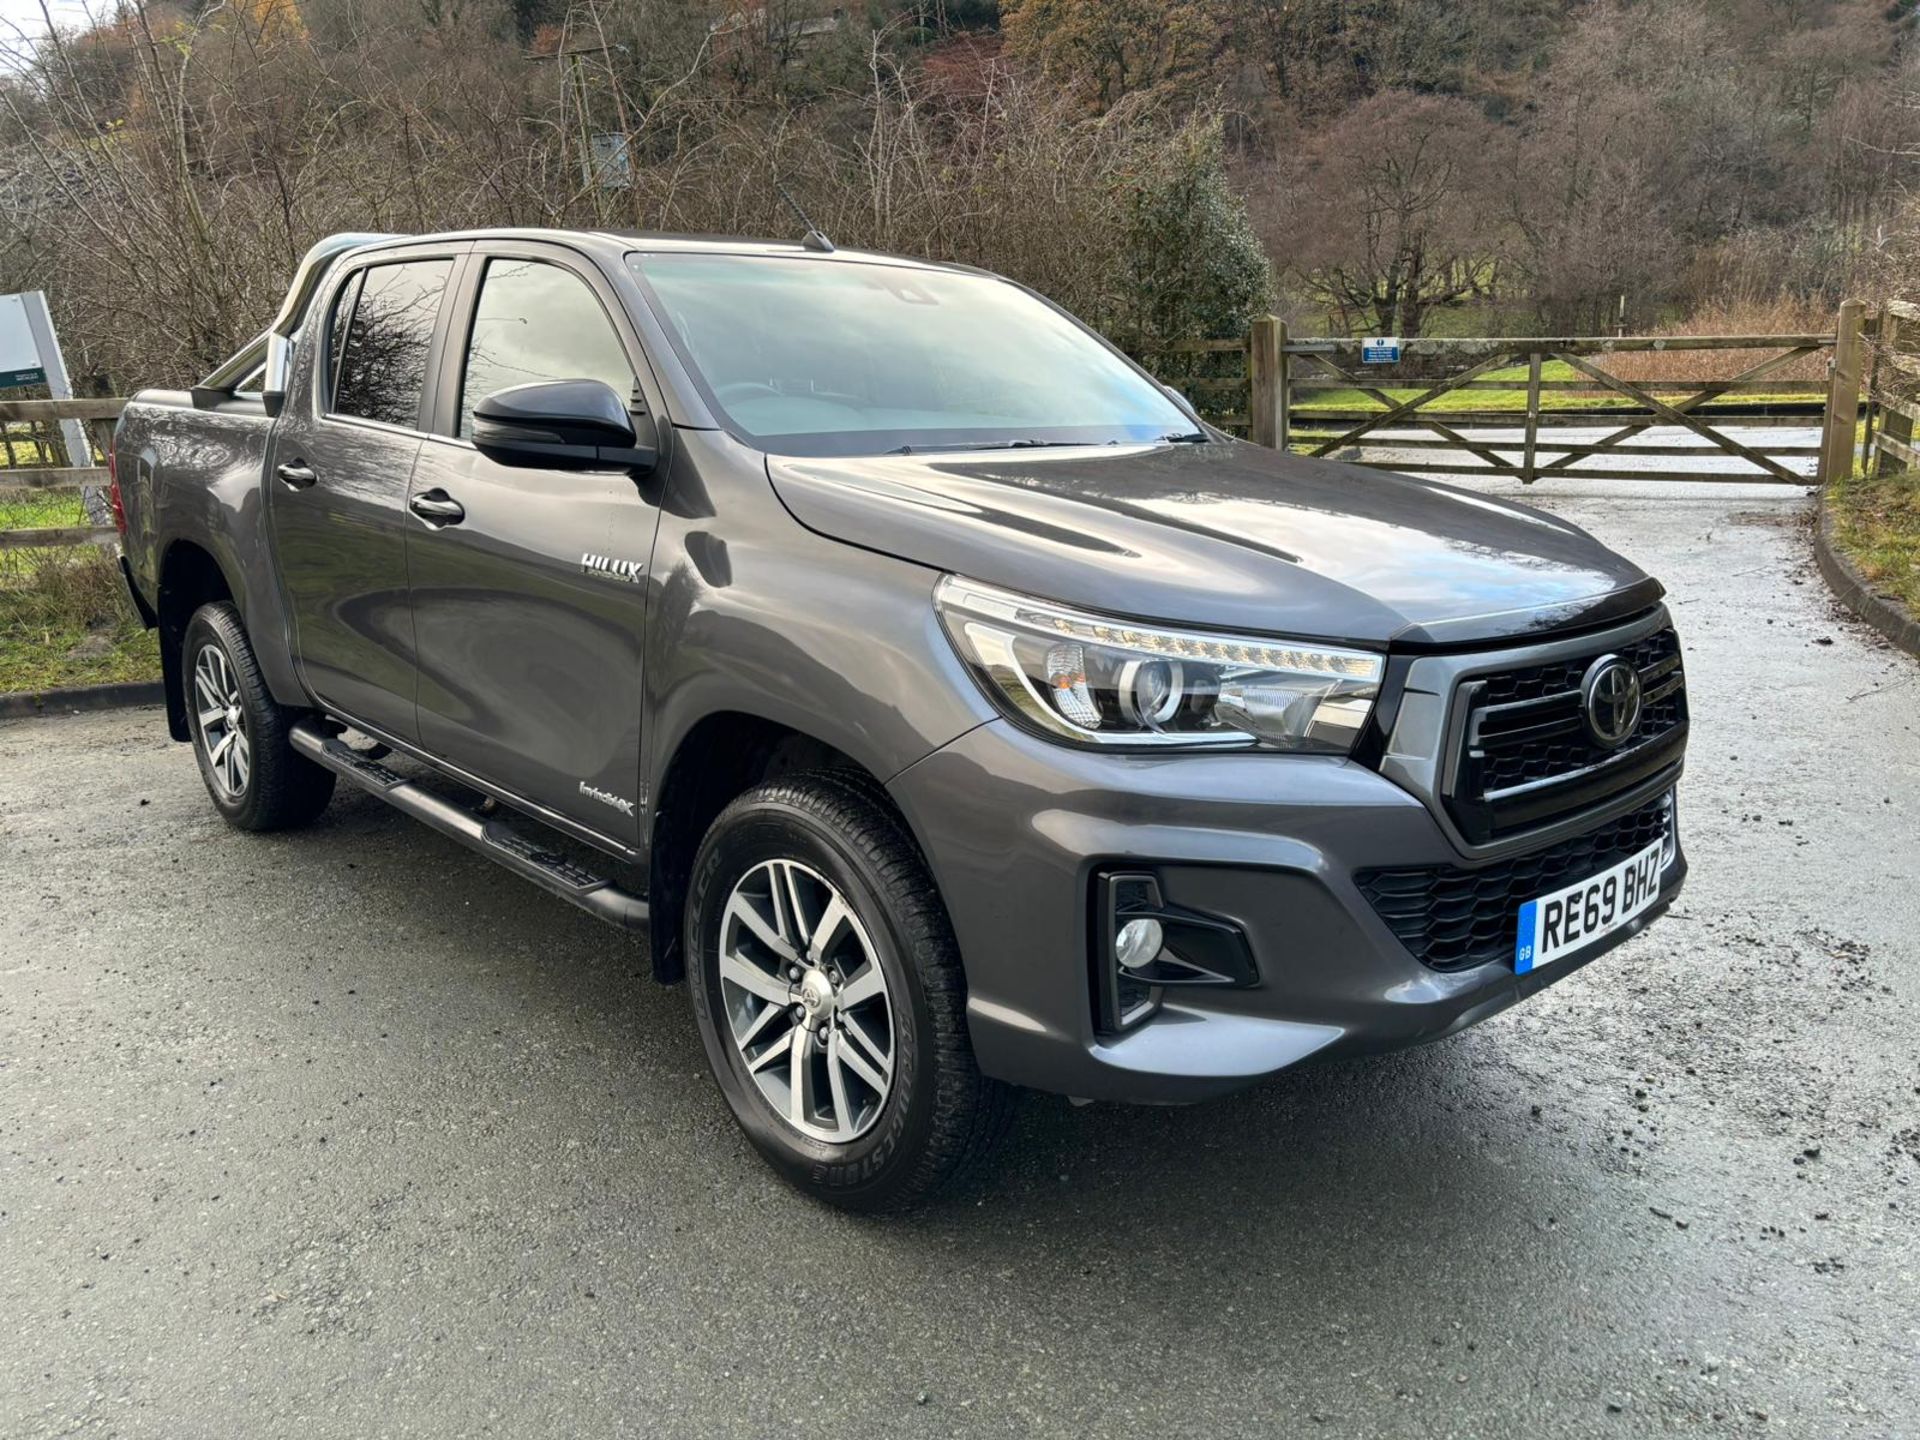 TOYOTA HILUX INVINCIBLE X DOUBLE CAB PICKUP TRUCK 4X4 AUTOMATIC 64K 4WD TWIN CAB